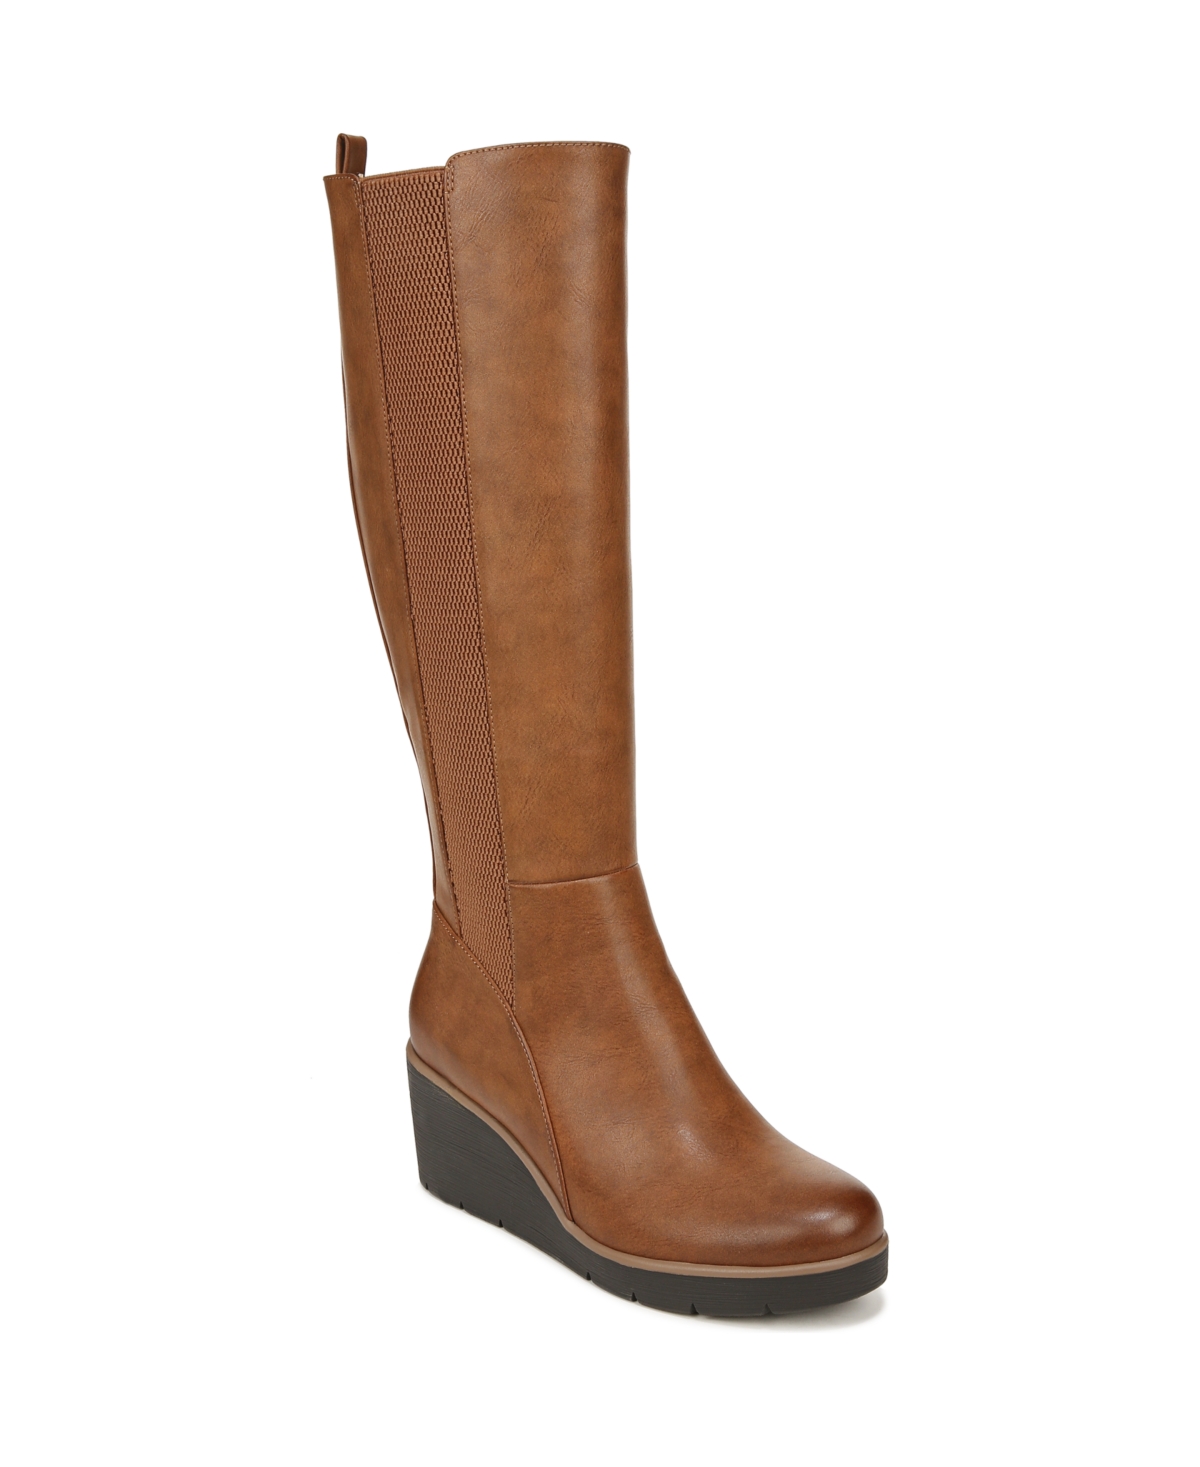 Adrian Wide Calf High Shaft Wedge Boots - Toffee Brown Faux Leather